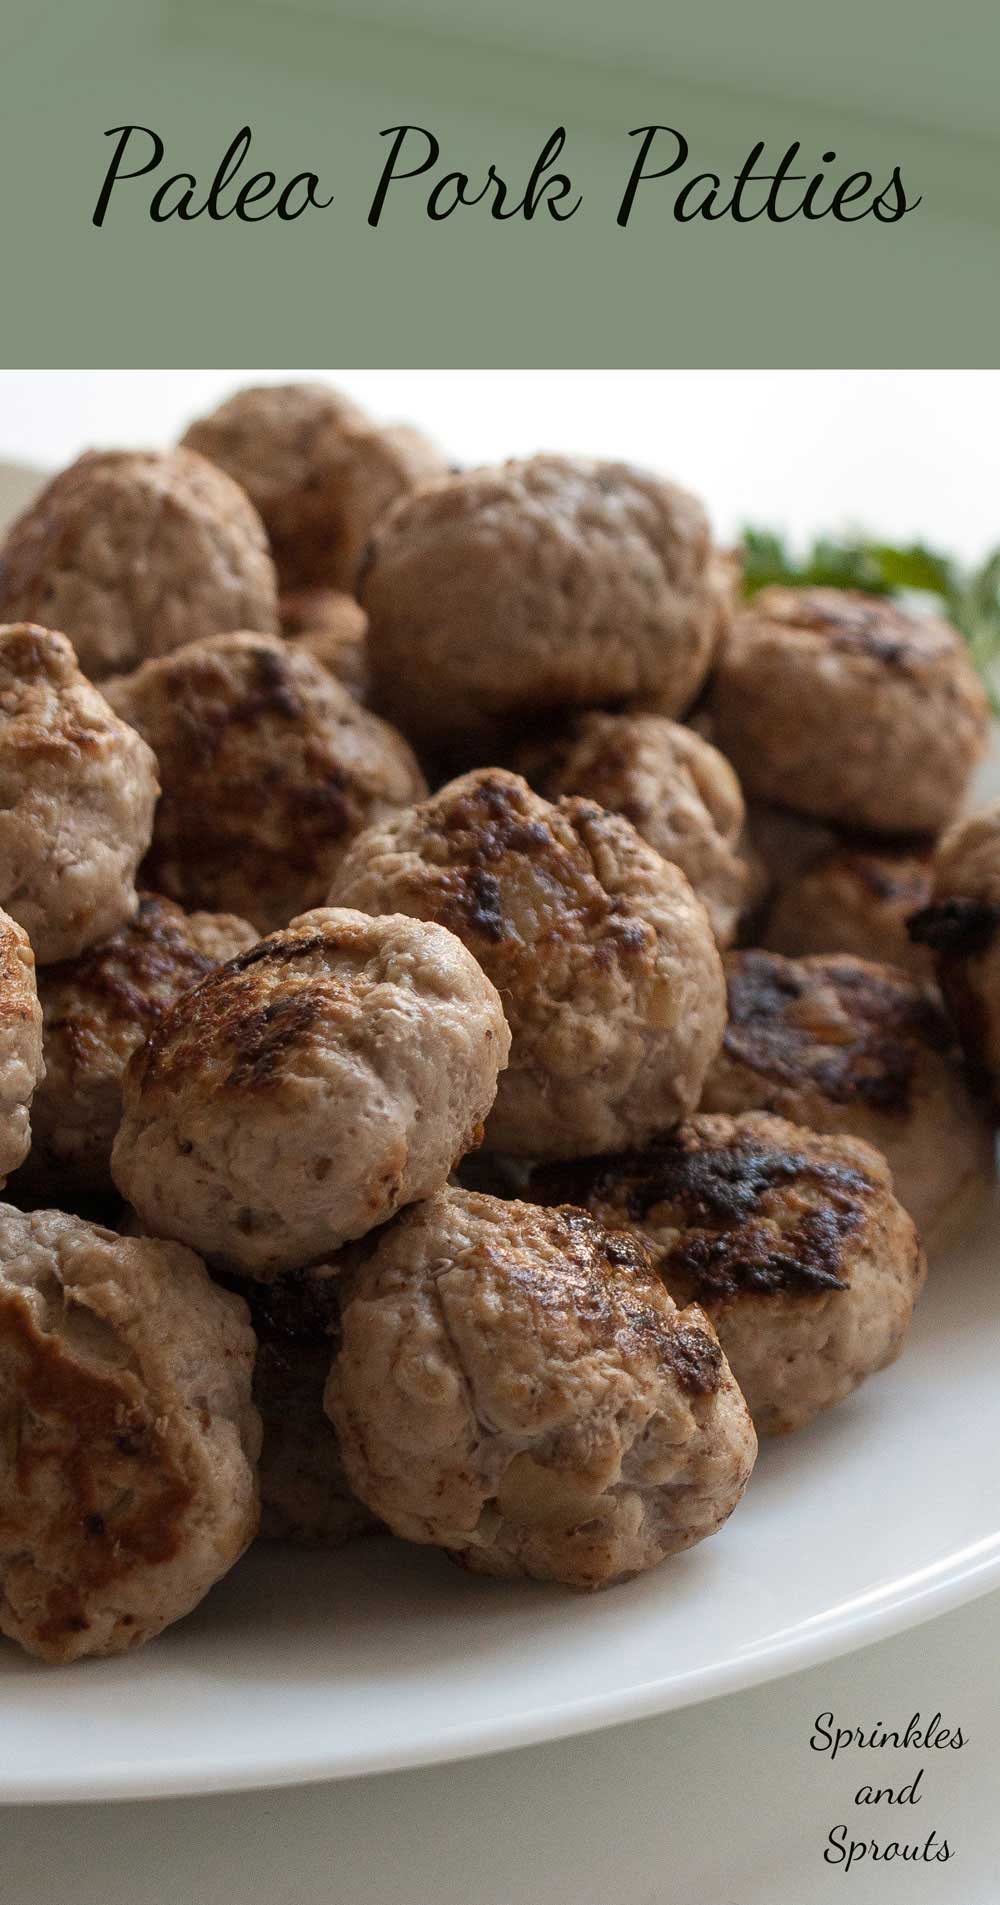 Paleo Pork Patties. Delicious & flavourful patties that mixes pork mince & a wonderful mixture of herbs to create gluten free & paleo friendly meatballs.